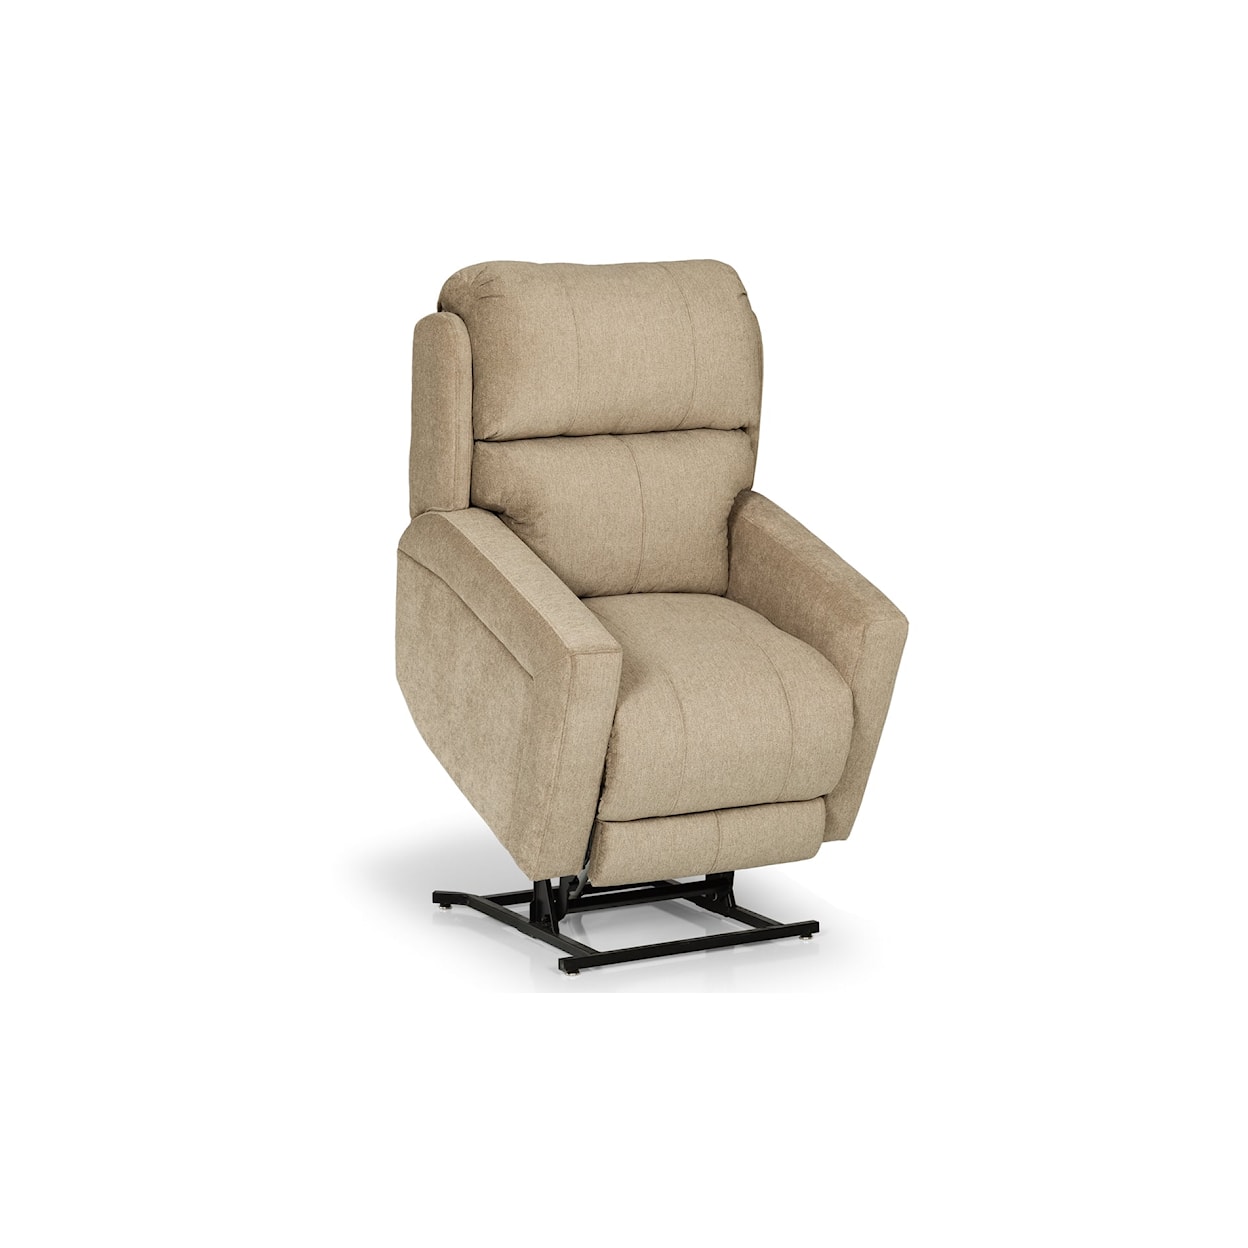 Stanton 898 Power Lift Chair with Power Headrest